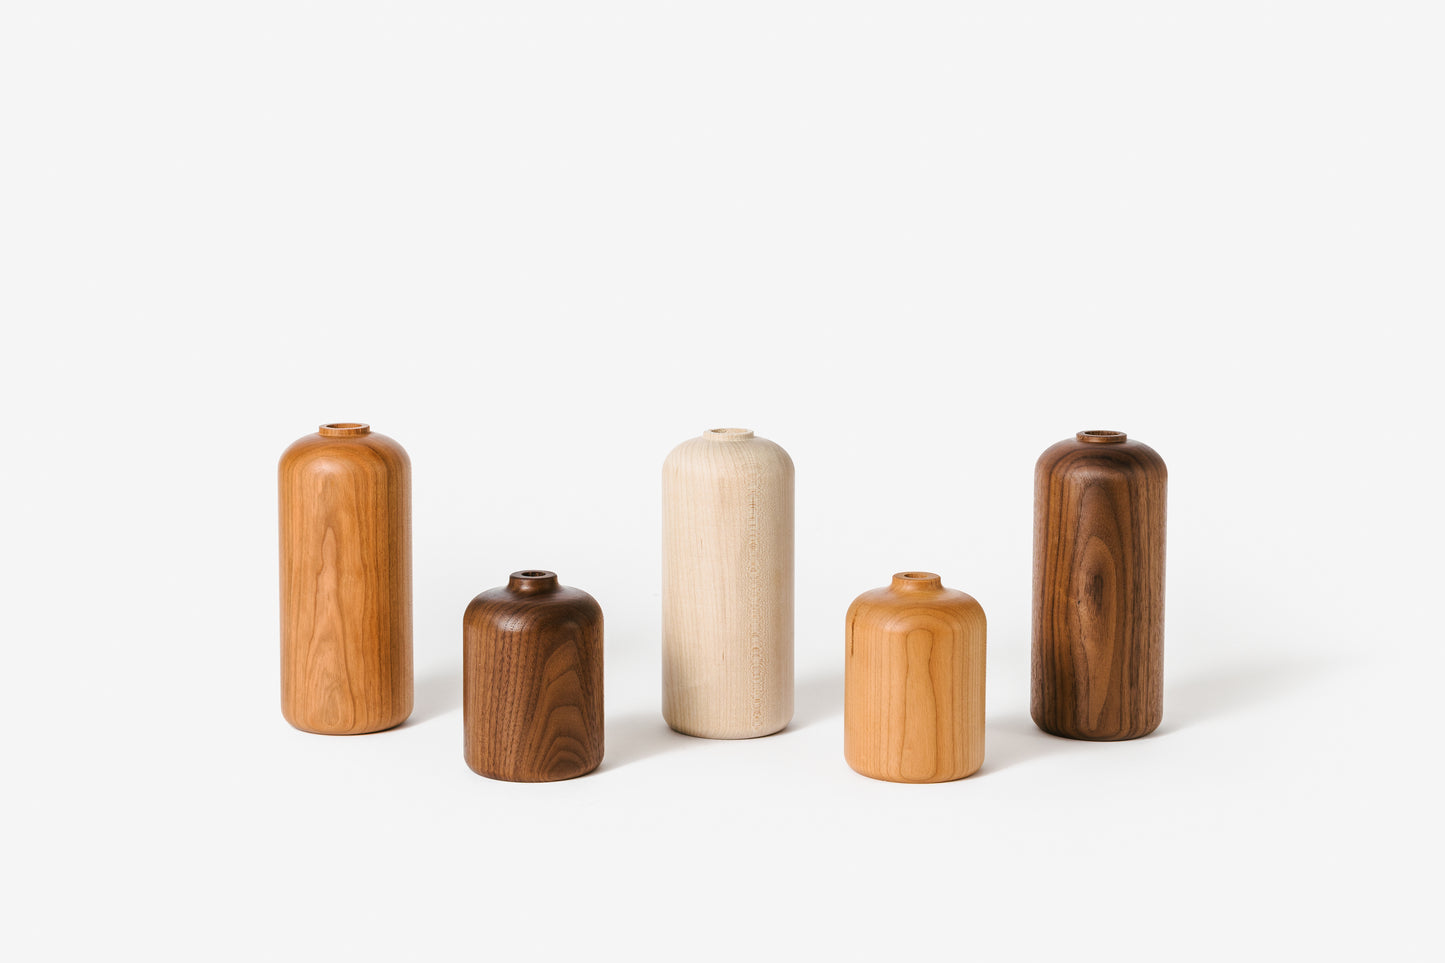 Collection of hardwood bud vases in various styles and materials. By Melanie Abrantes Designs.